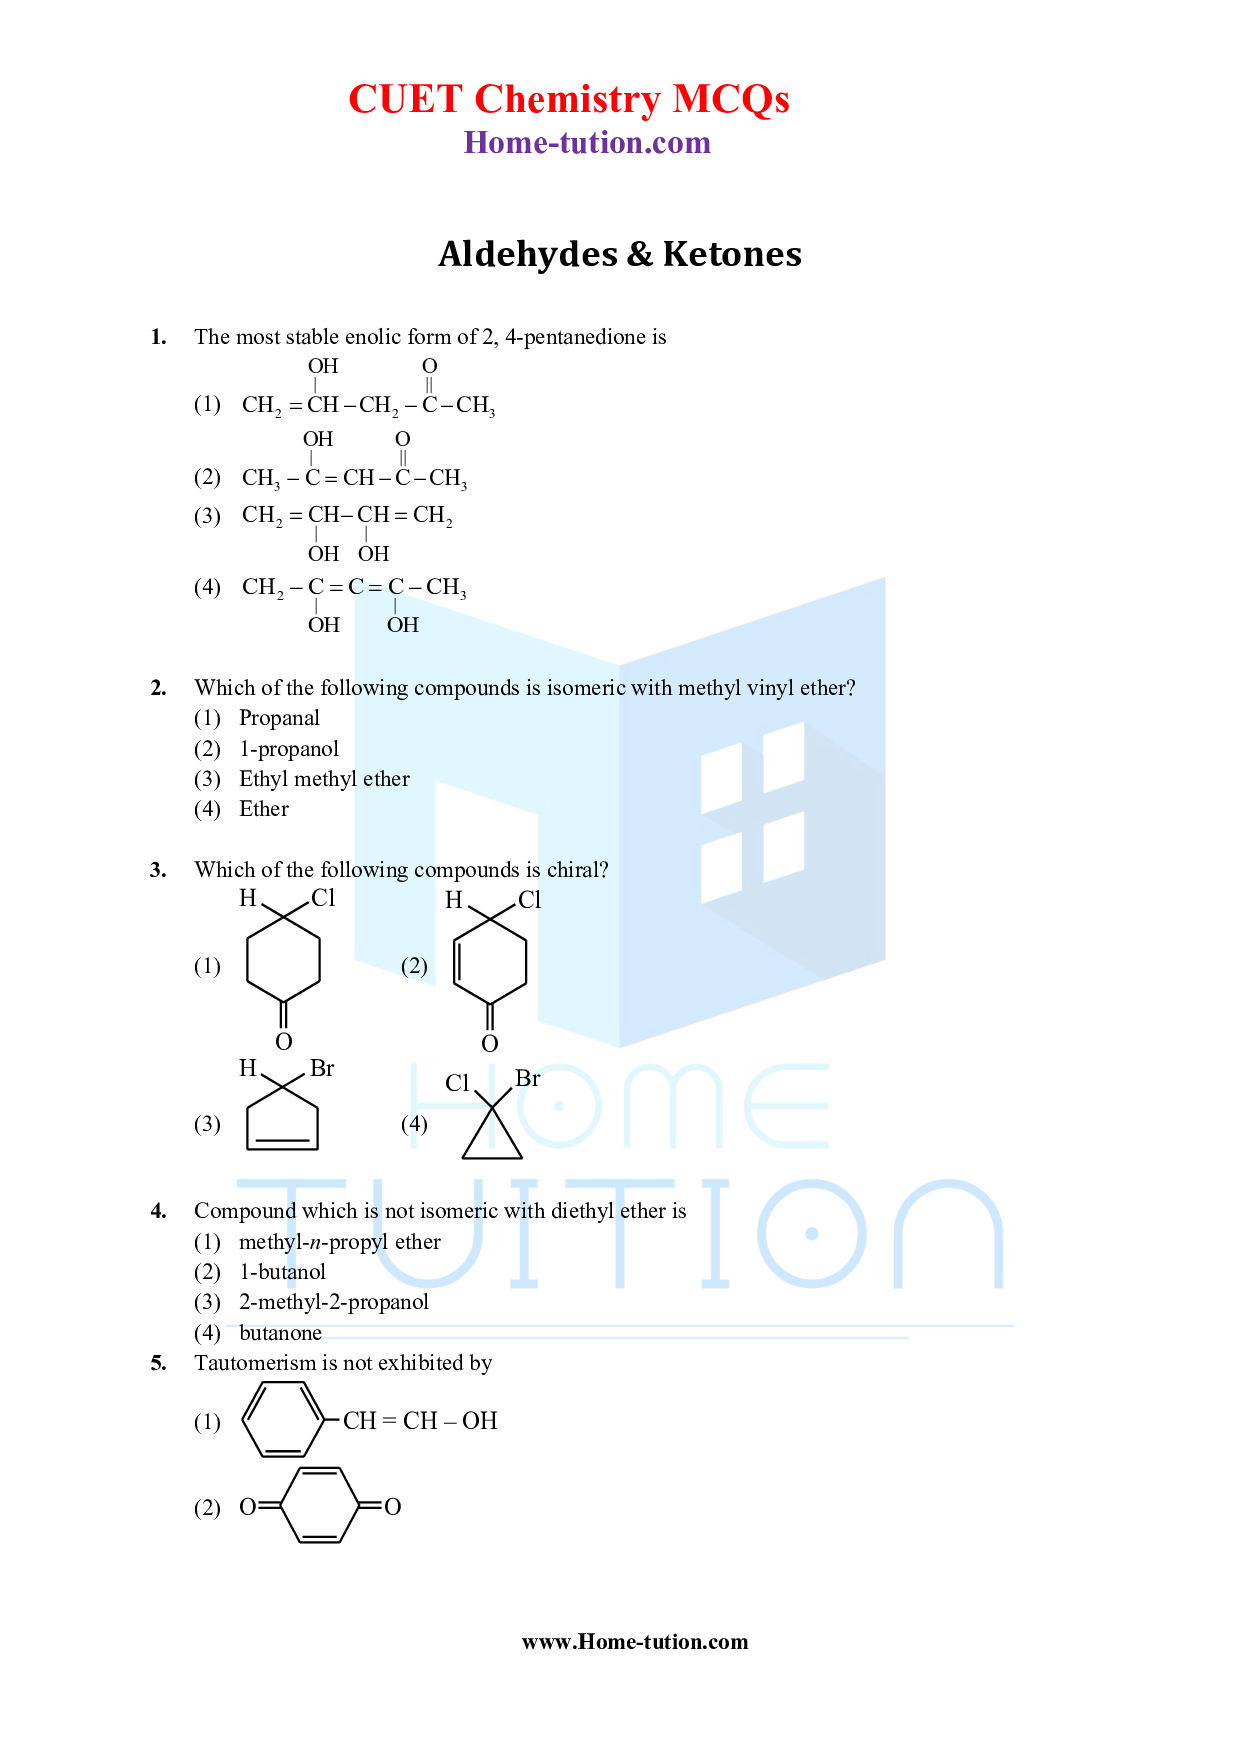 CUET MCQ Questions For Chapter-13 Aldehydes & Ketones